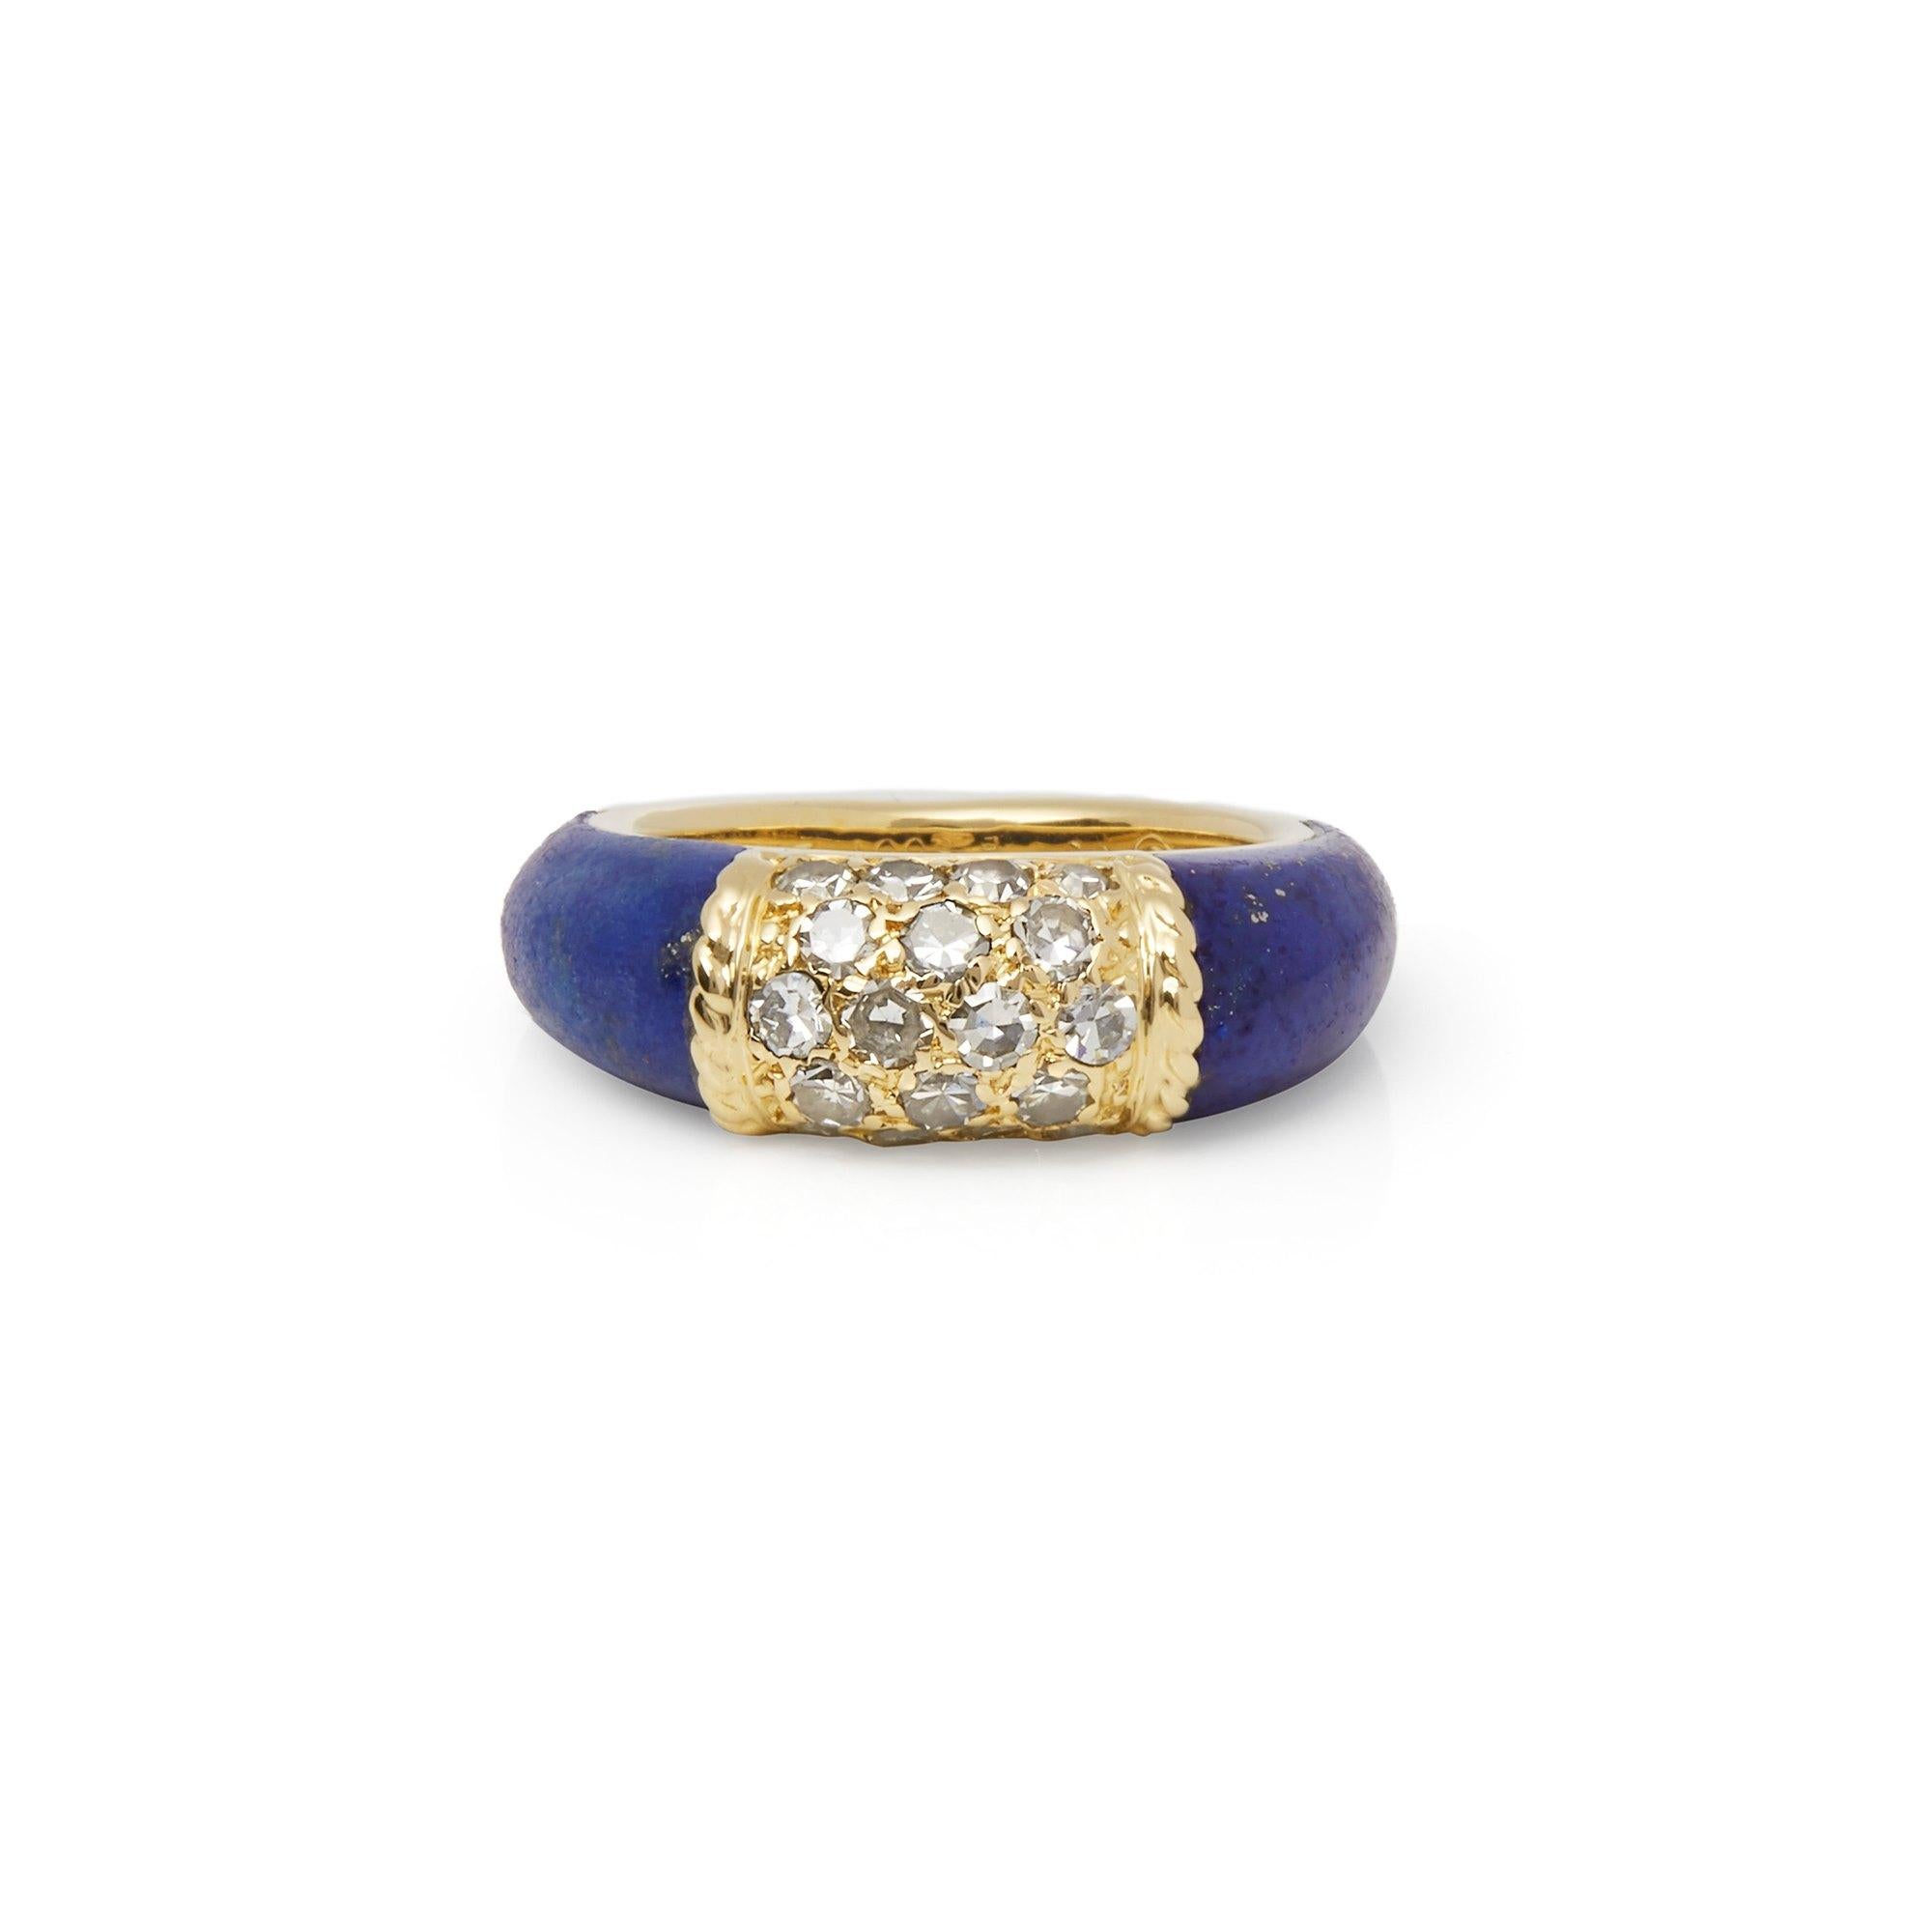 This Vintage Ring by Van Cleef and Arpels is from their Philippine Collection and features a Lapis Lazuli Carved Band with 18k Yellow Gold Pave Diamond section set with 18 Round Brilliant Cut Diamonds Totalling 0.90cts to the top. Ring Size UK I, EU